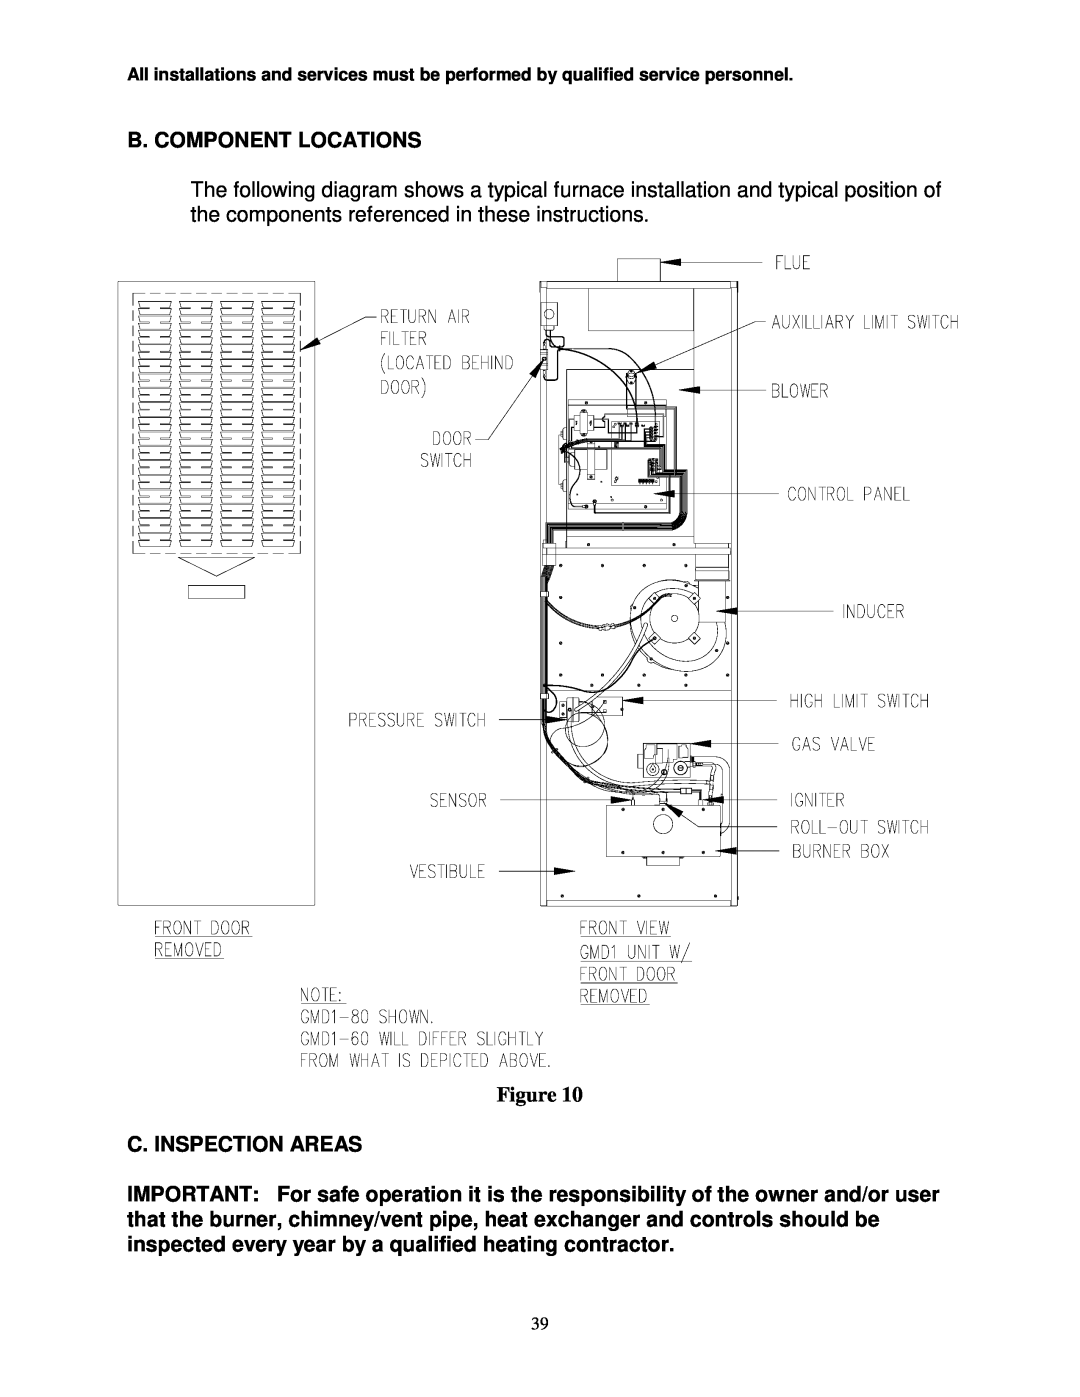 Thermo Products GDM1-80N, GMD1-60N service manual B. Component Locations, C. Inspection Areas 